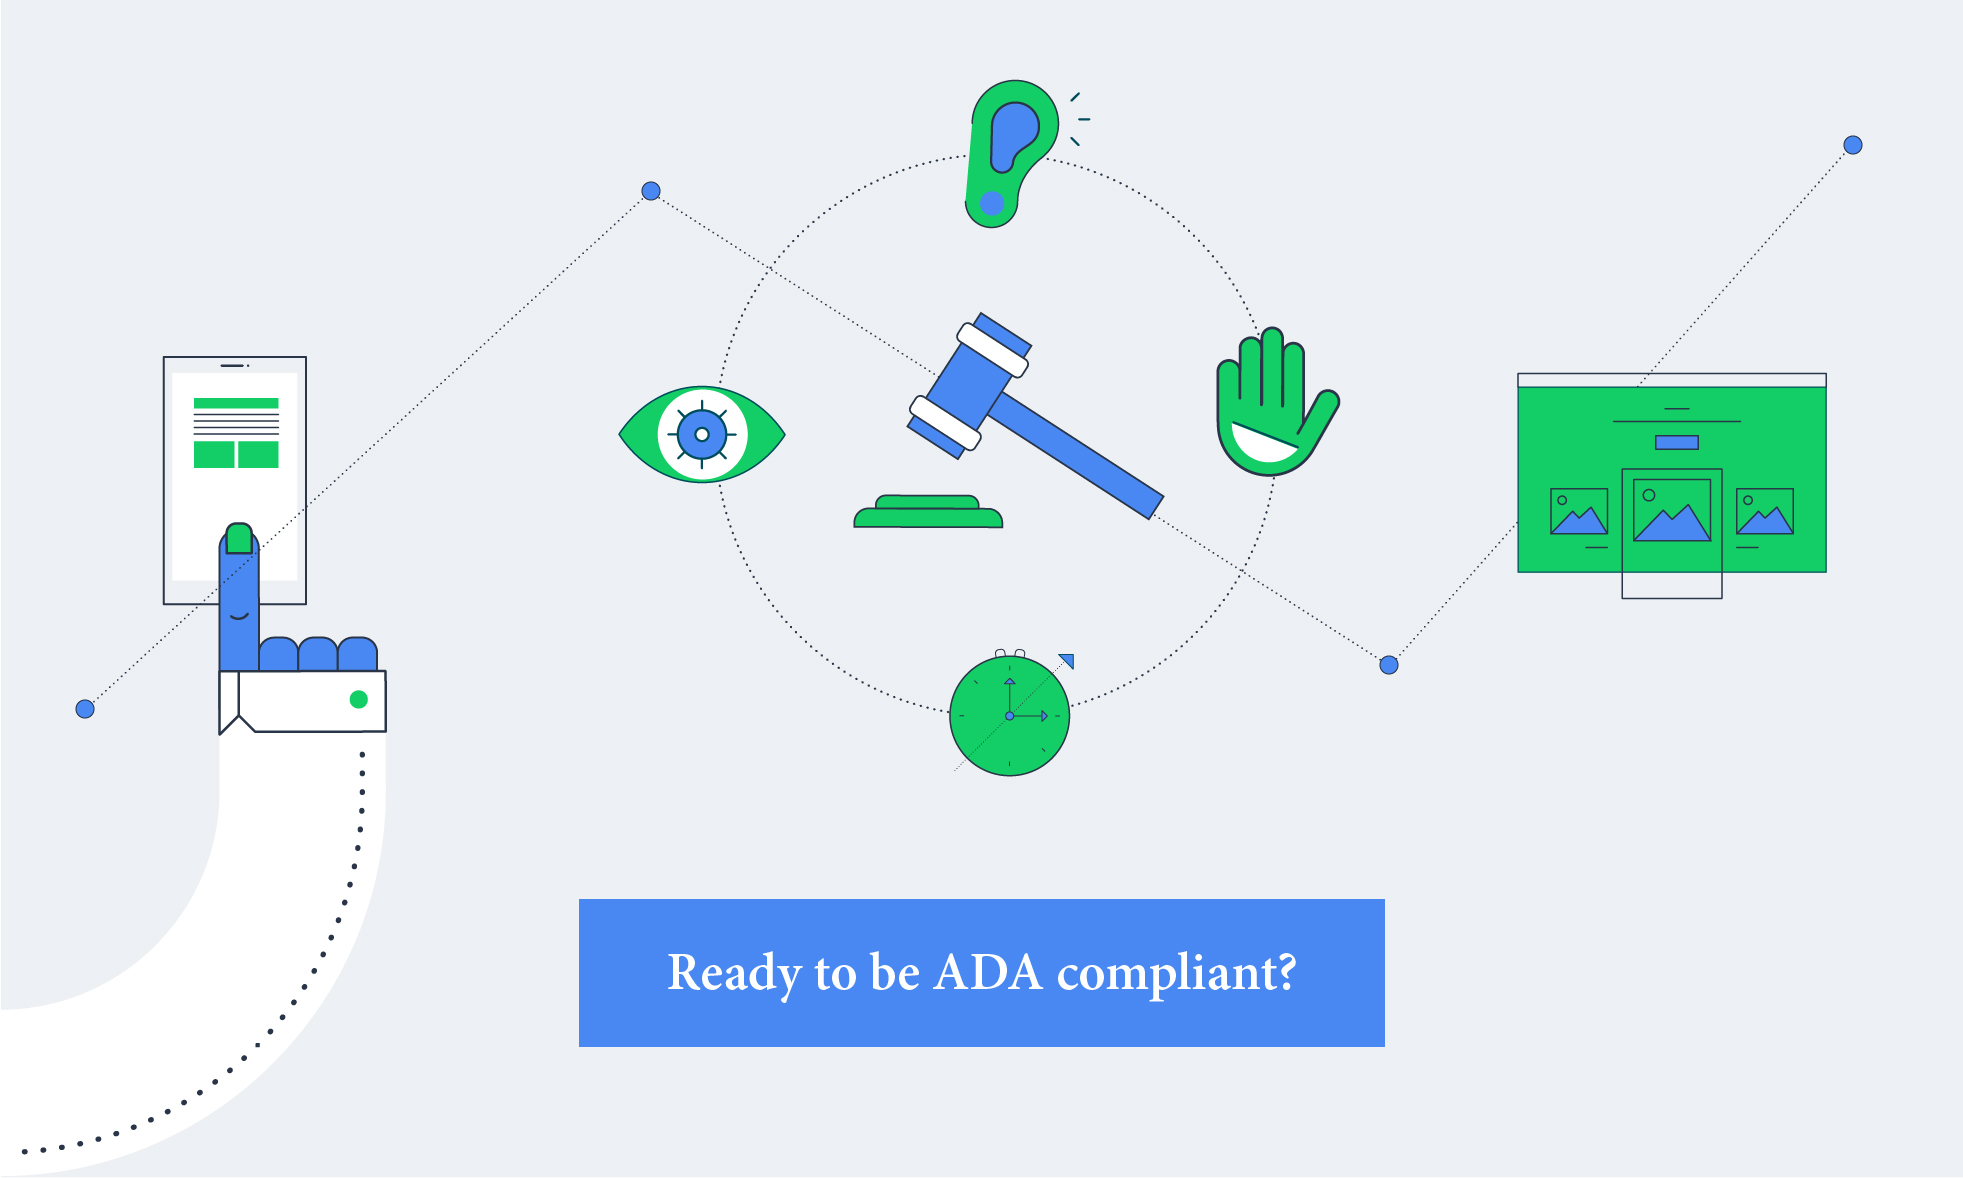 Are you ready to be ADA compliant?